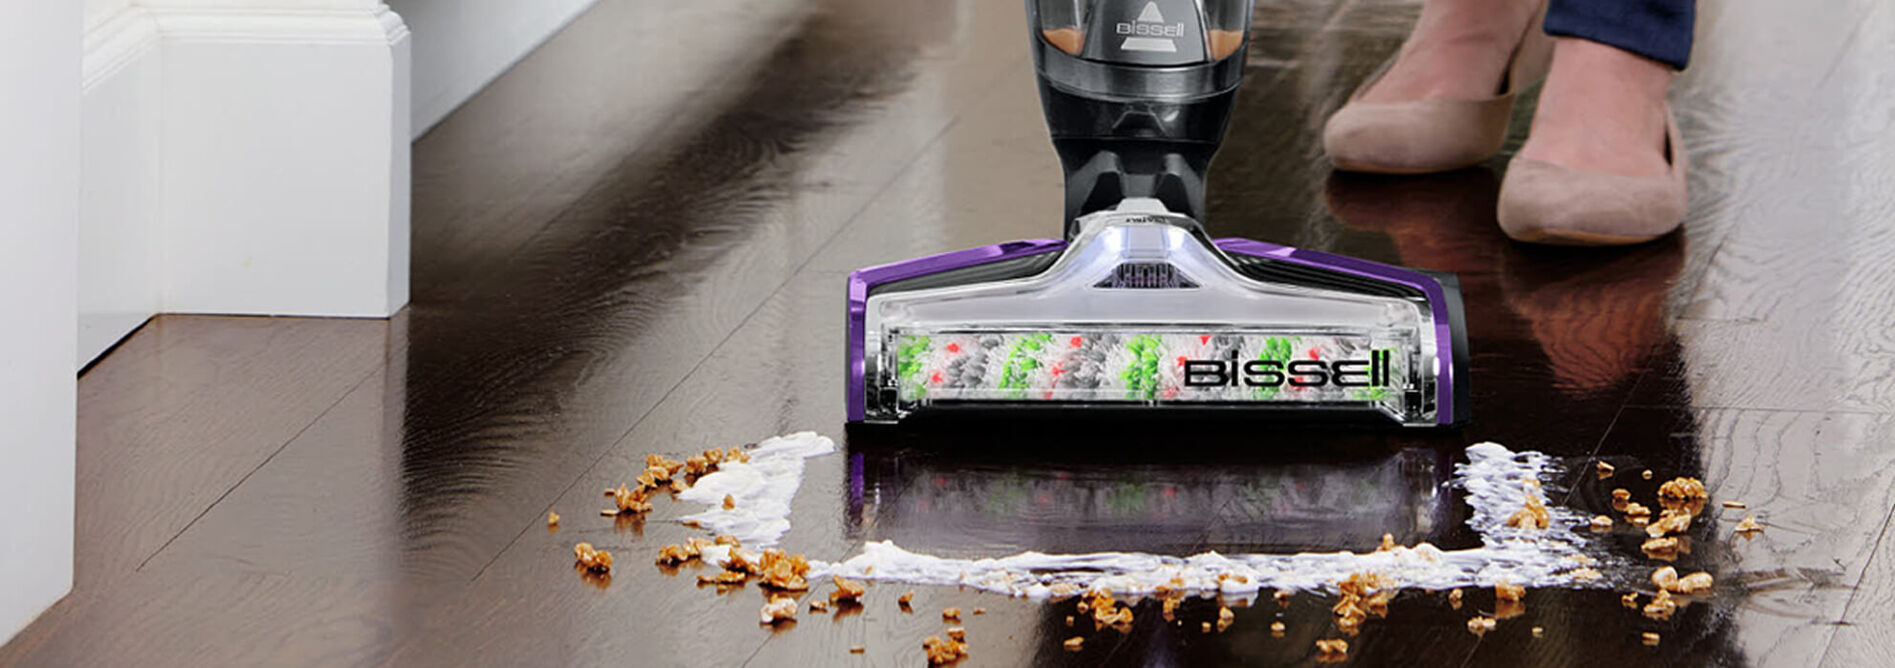 Bissell CrossWave Max Turbo Multi-Surface Cleaner - R4K - Better Than Rental